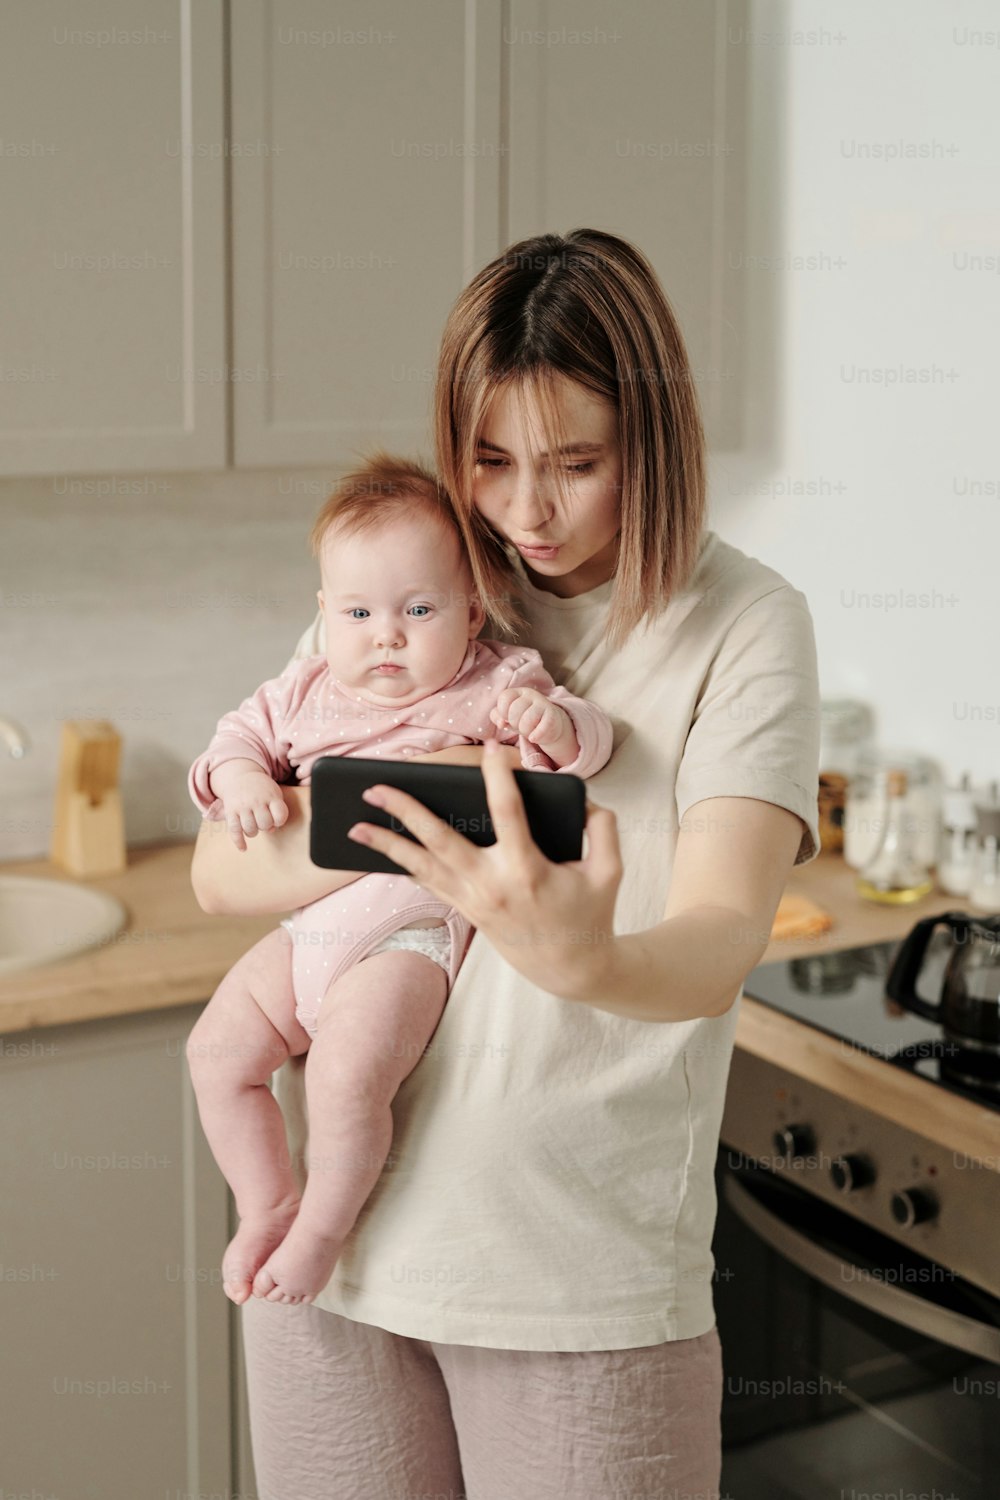 Contemporary young woman with smartphone and baby communicating in video chat in the kitchen